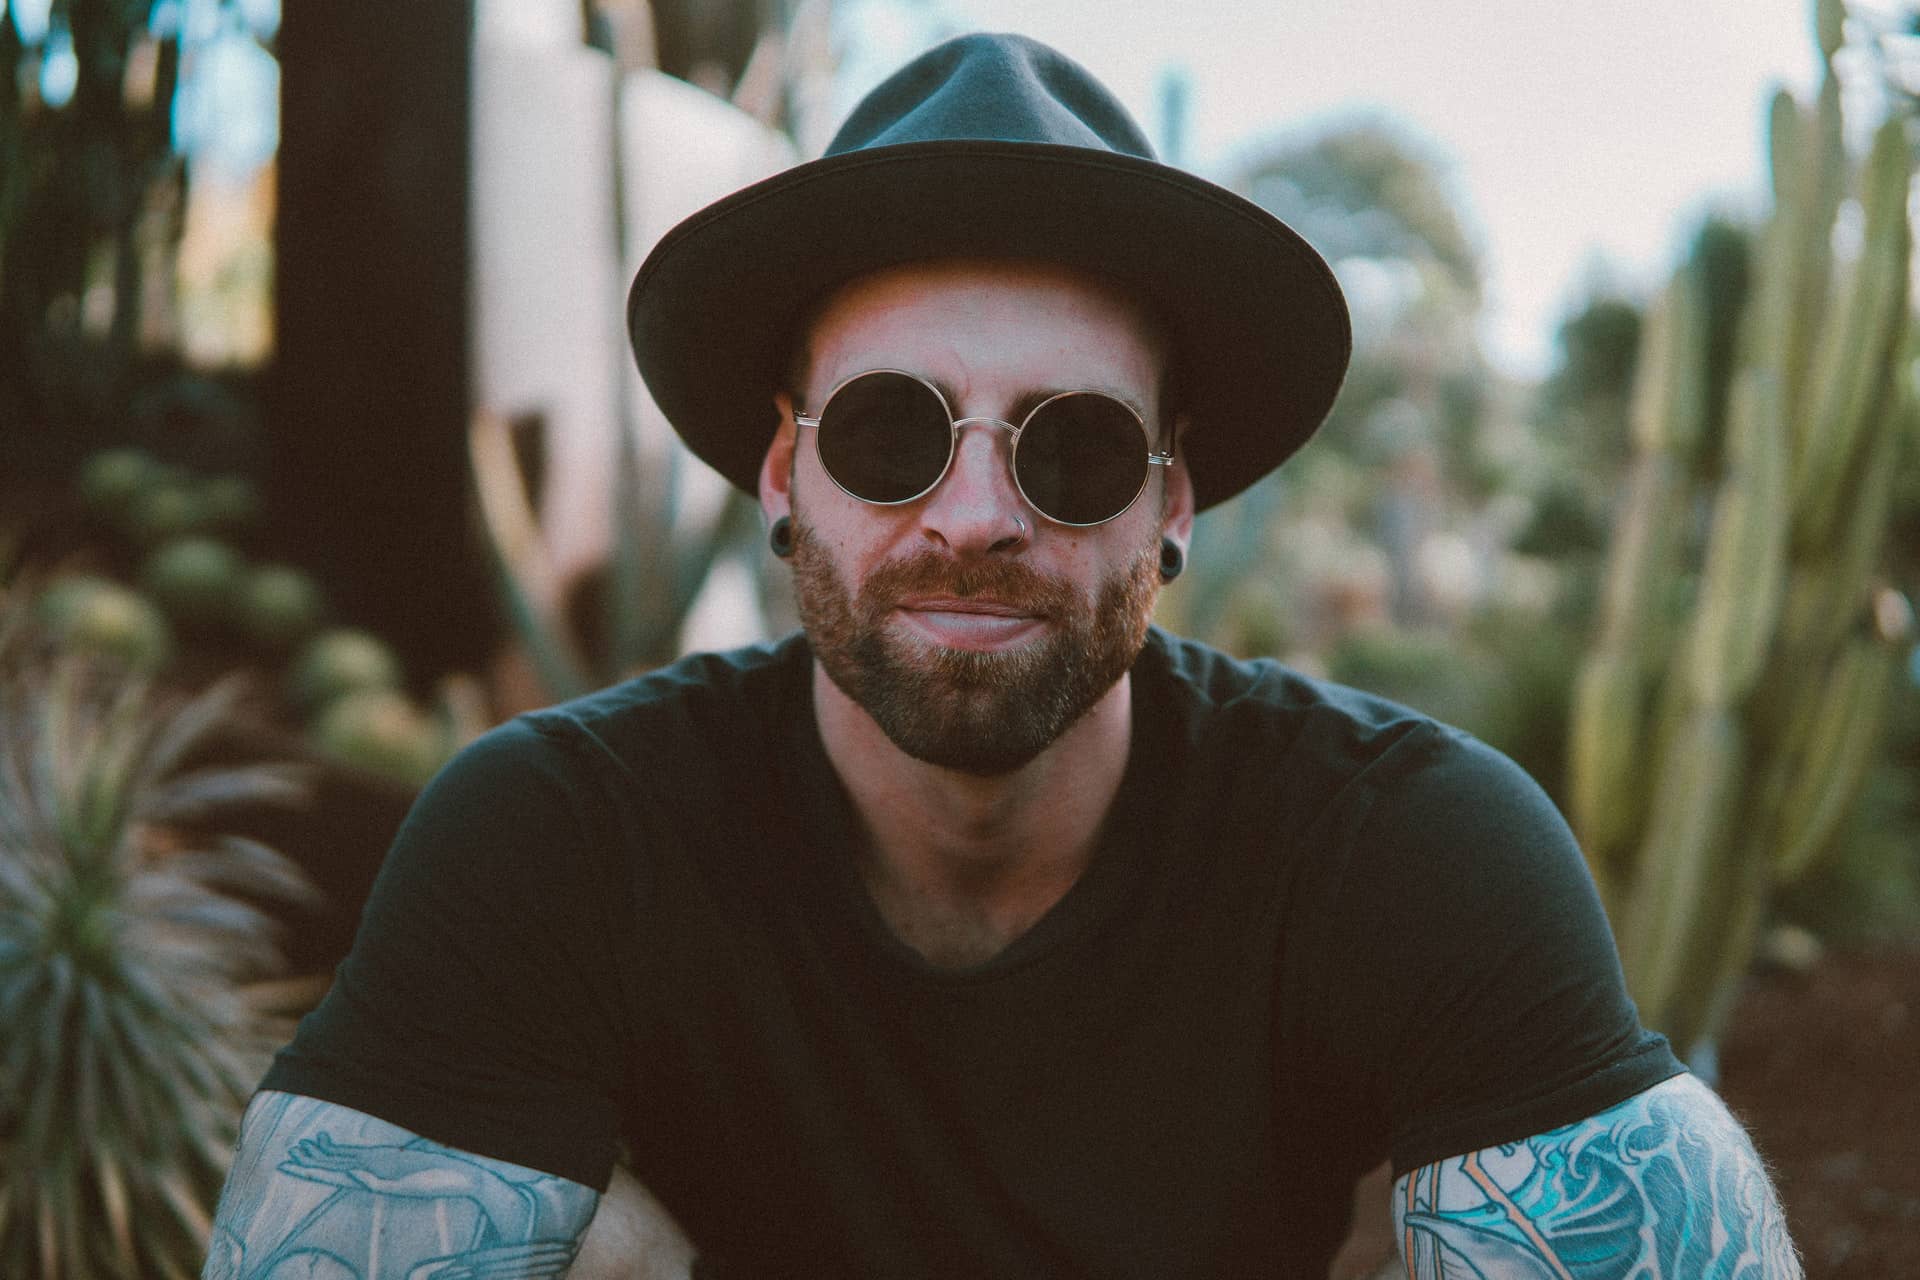 Smiling man in hat and sunglasses